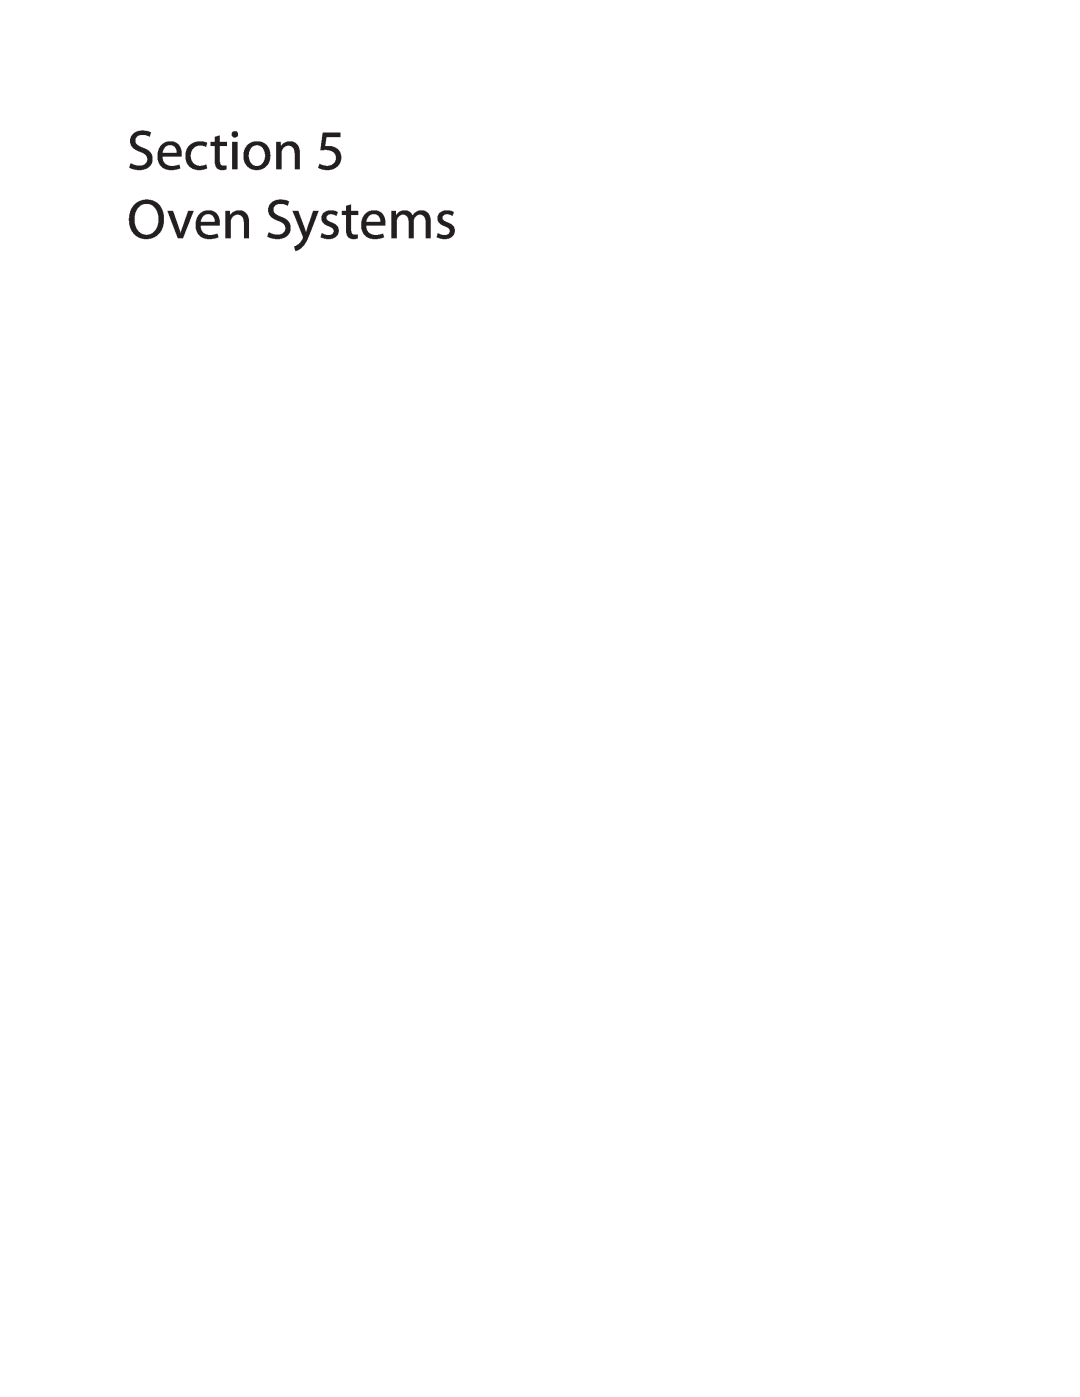 Turbo Chef Technologies Residential Single and Double Wall Oven service manual Oven Systems 